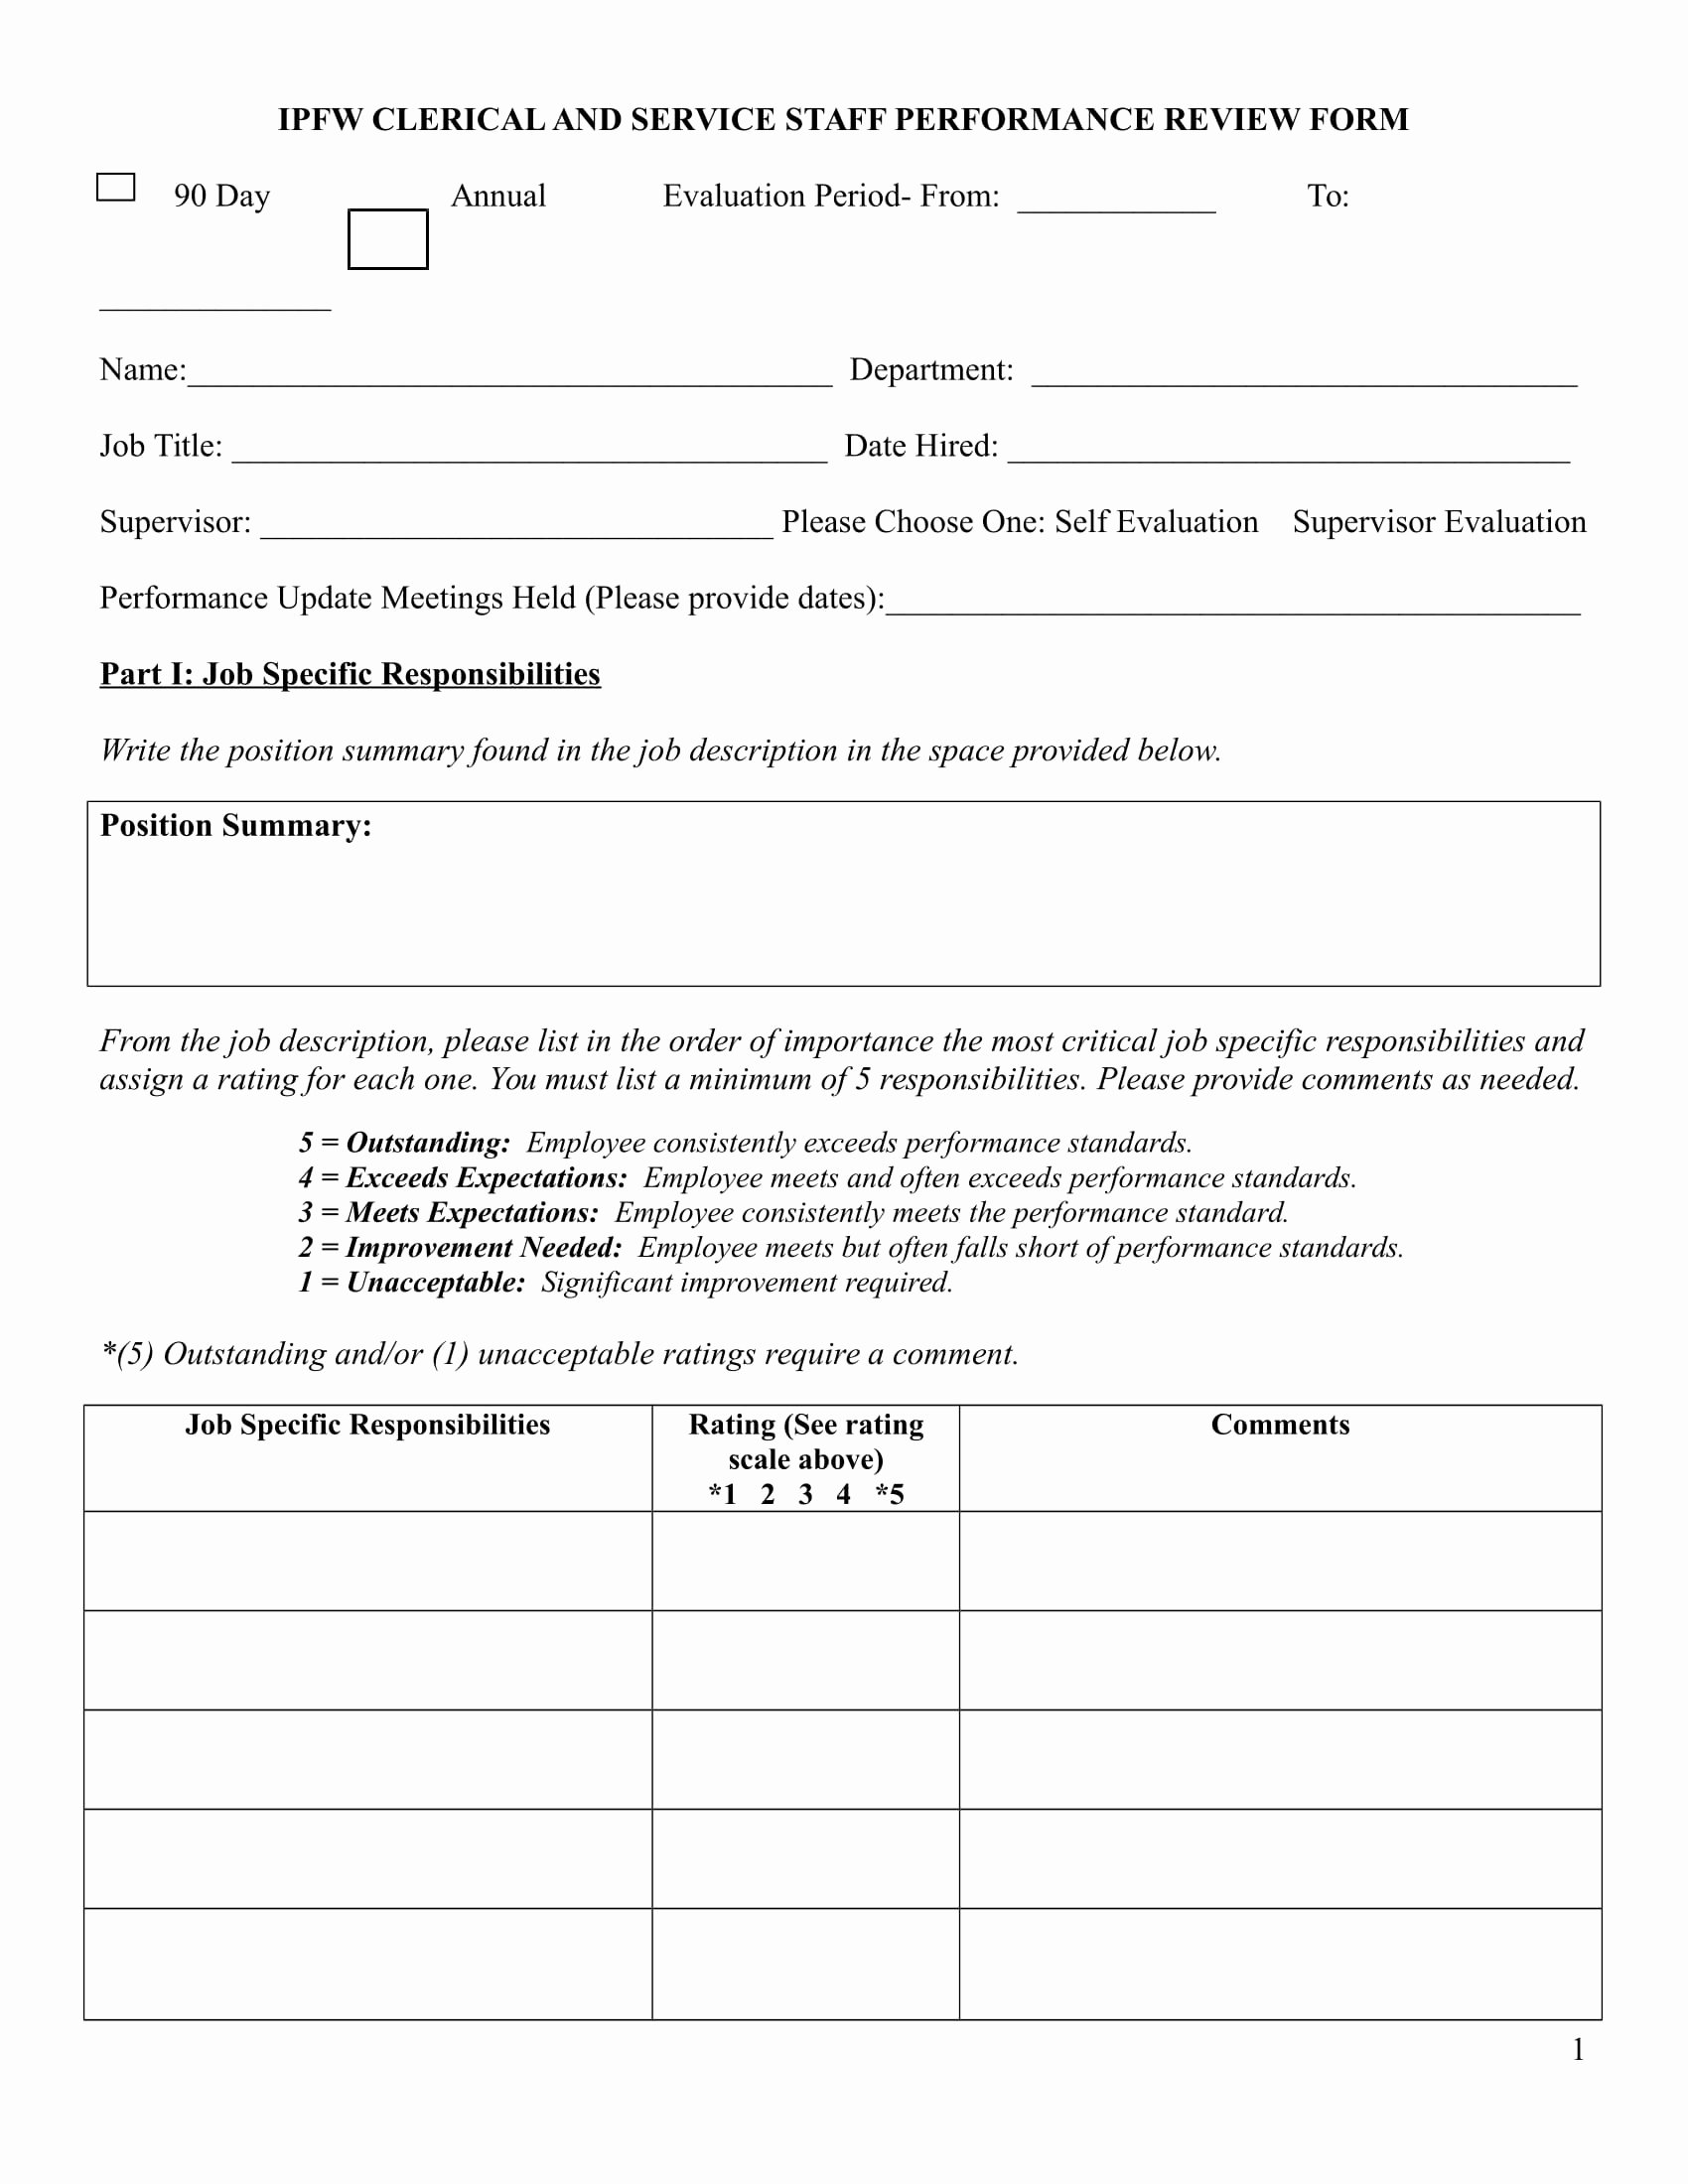 90 Day Employee Review Template Awesome 14 90 Day Review forms Free Word Pdf format Download